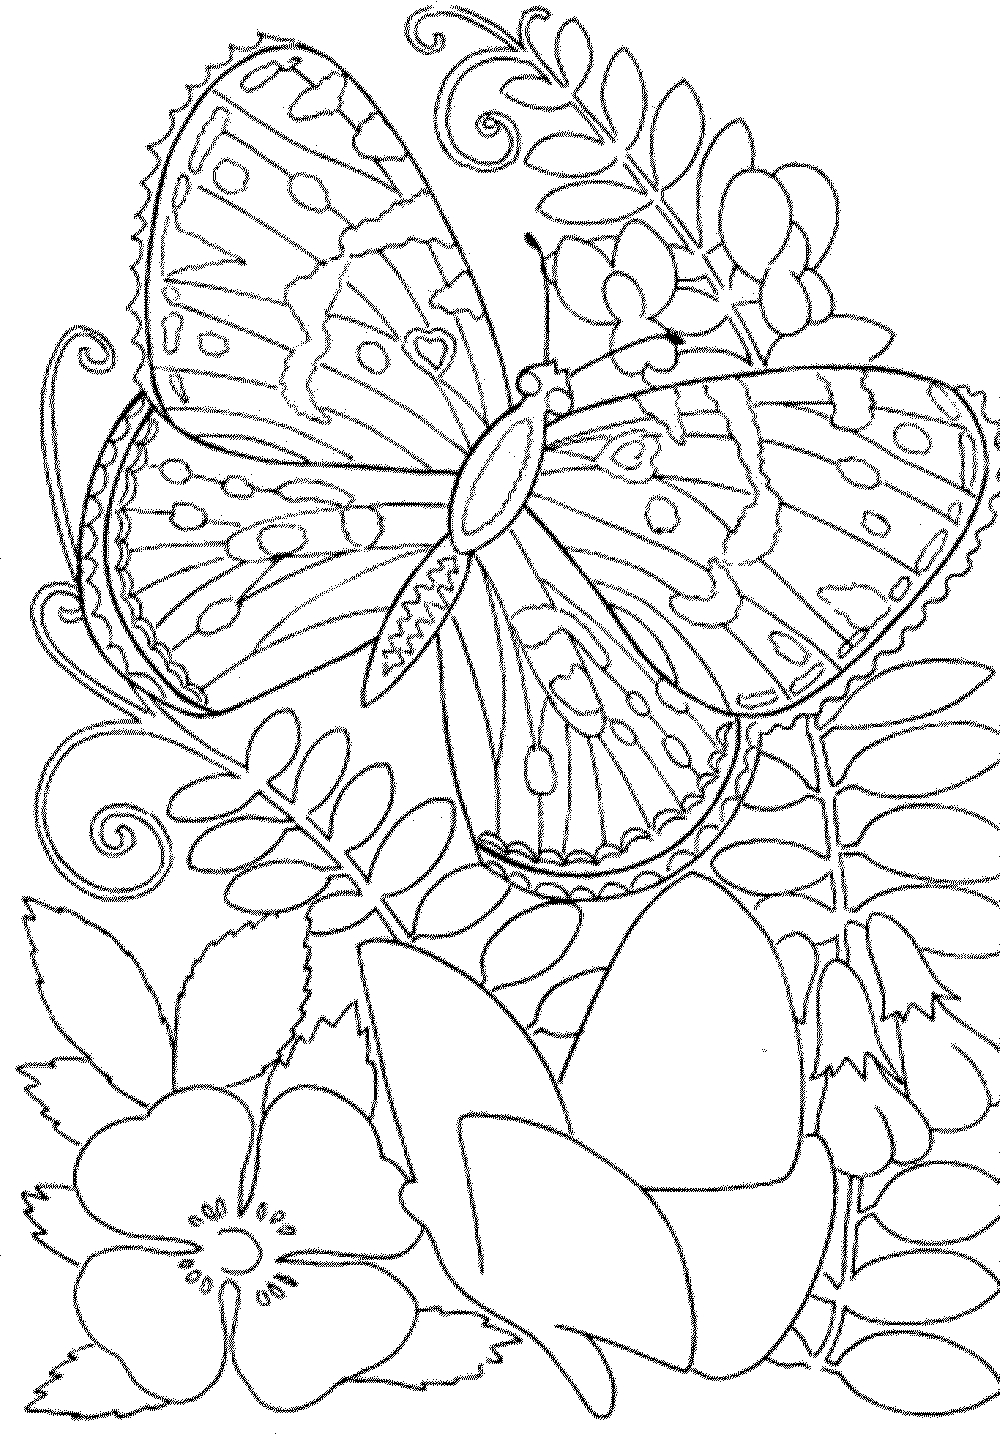 Free Printable Spring Coloring Pages For Adults - Coloring Home - Free Printable Spring Coloring Pages For Adults